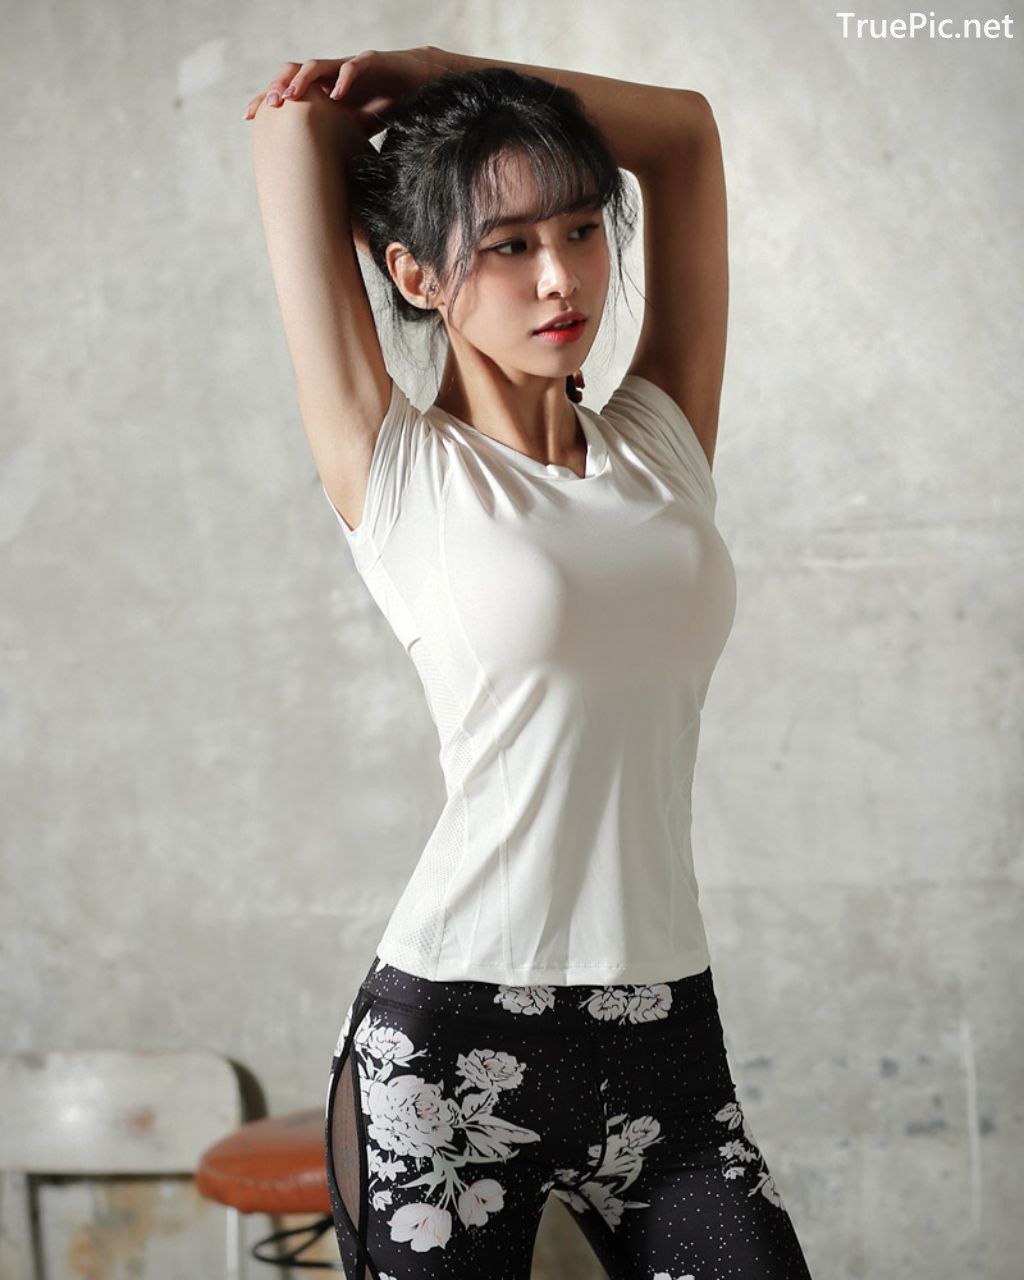 Image-Korean-Fashion-Model-Ju-Woo-Fitness-Set-Collection-TruePic.net- Picture-153